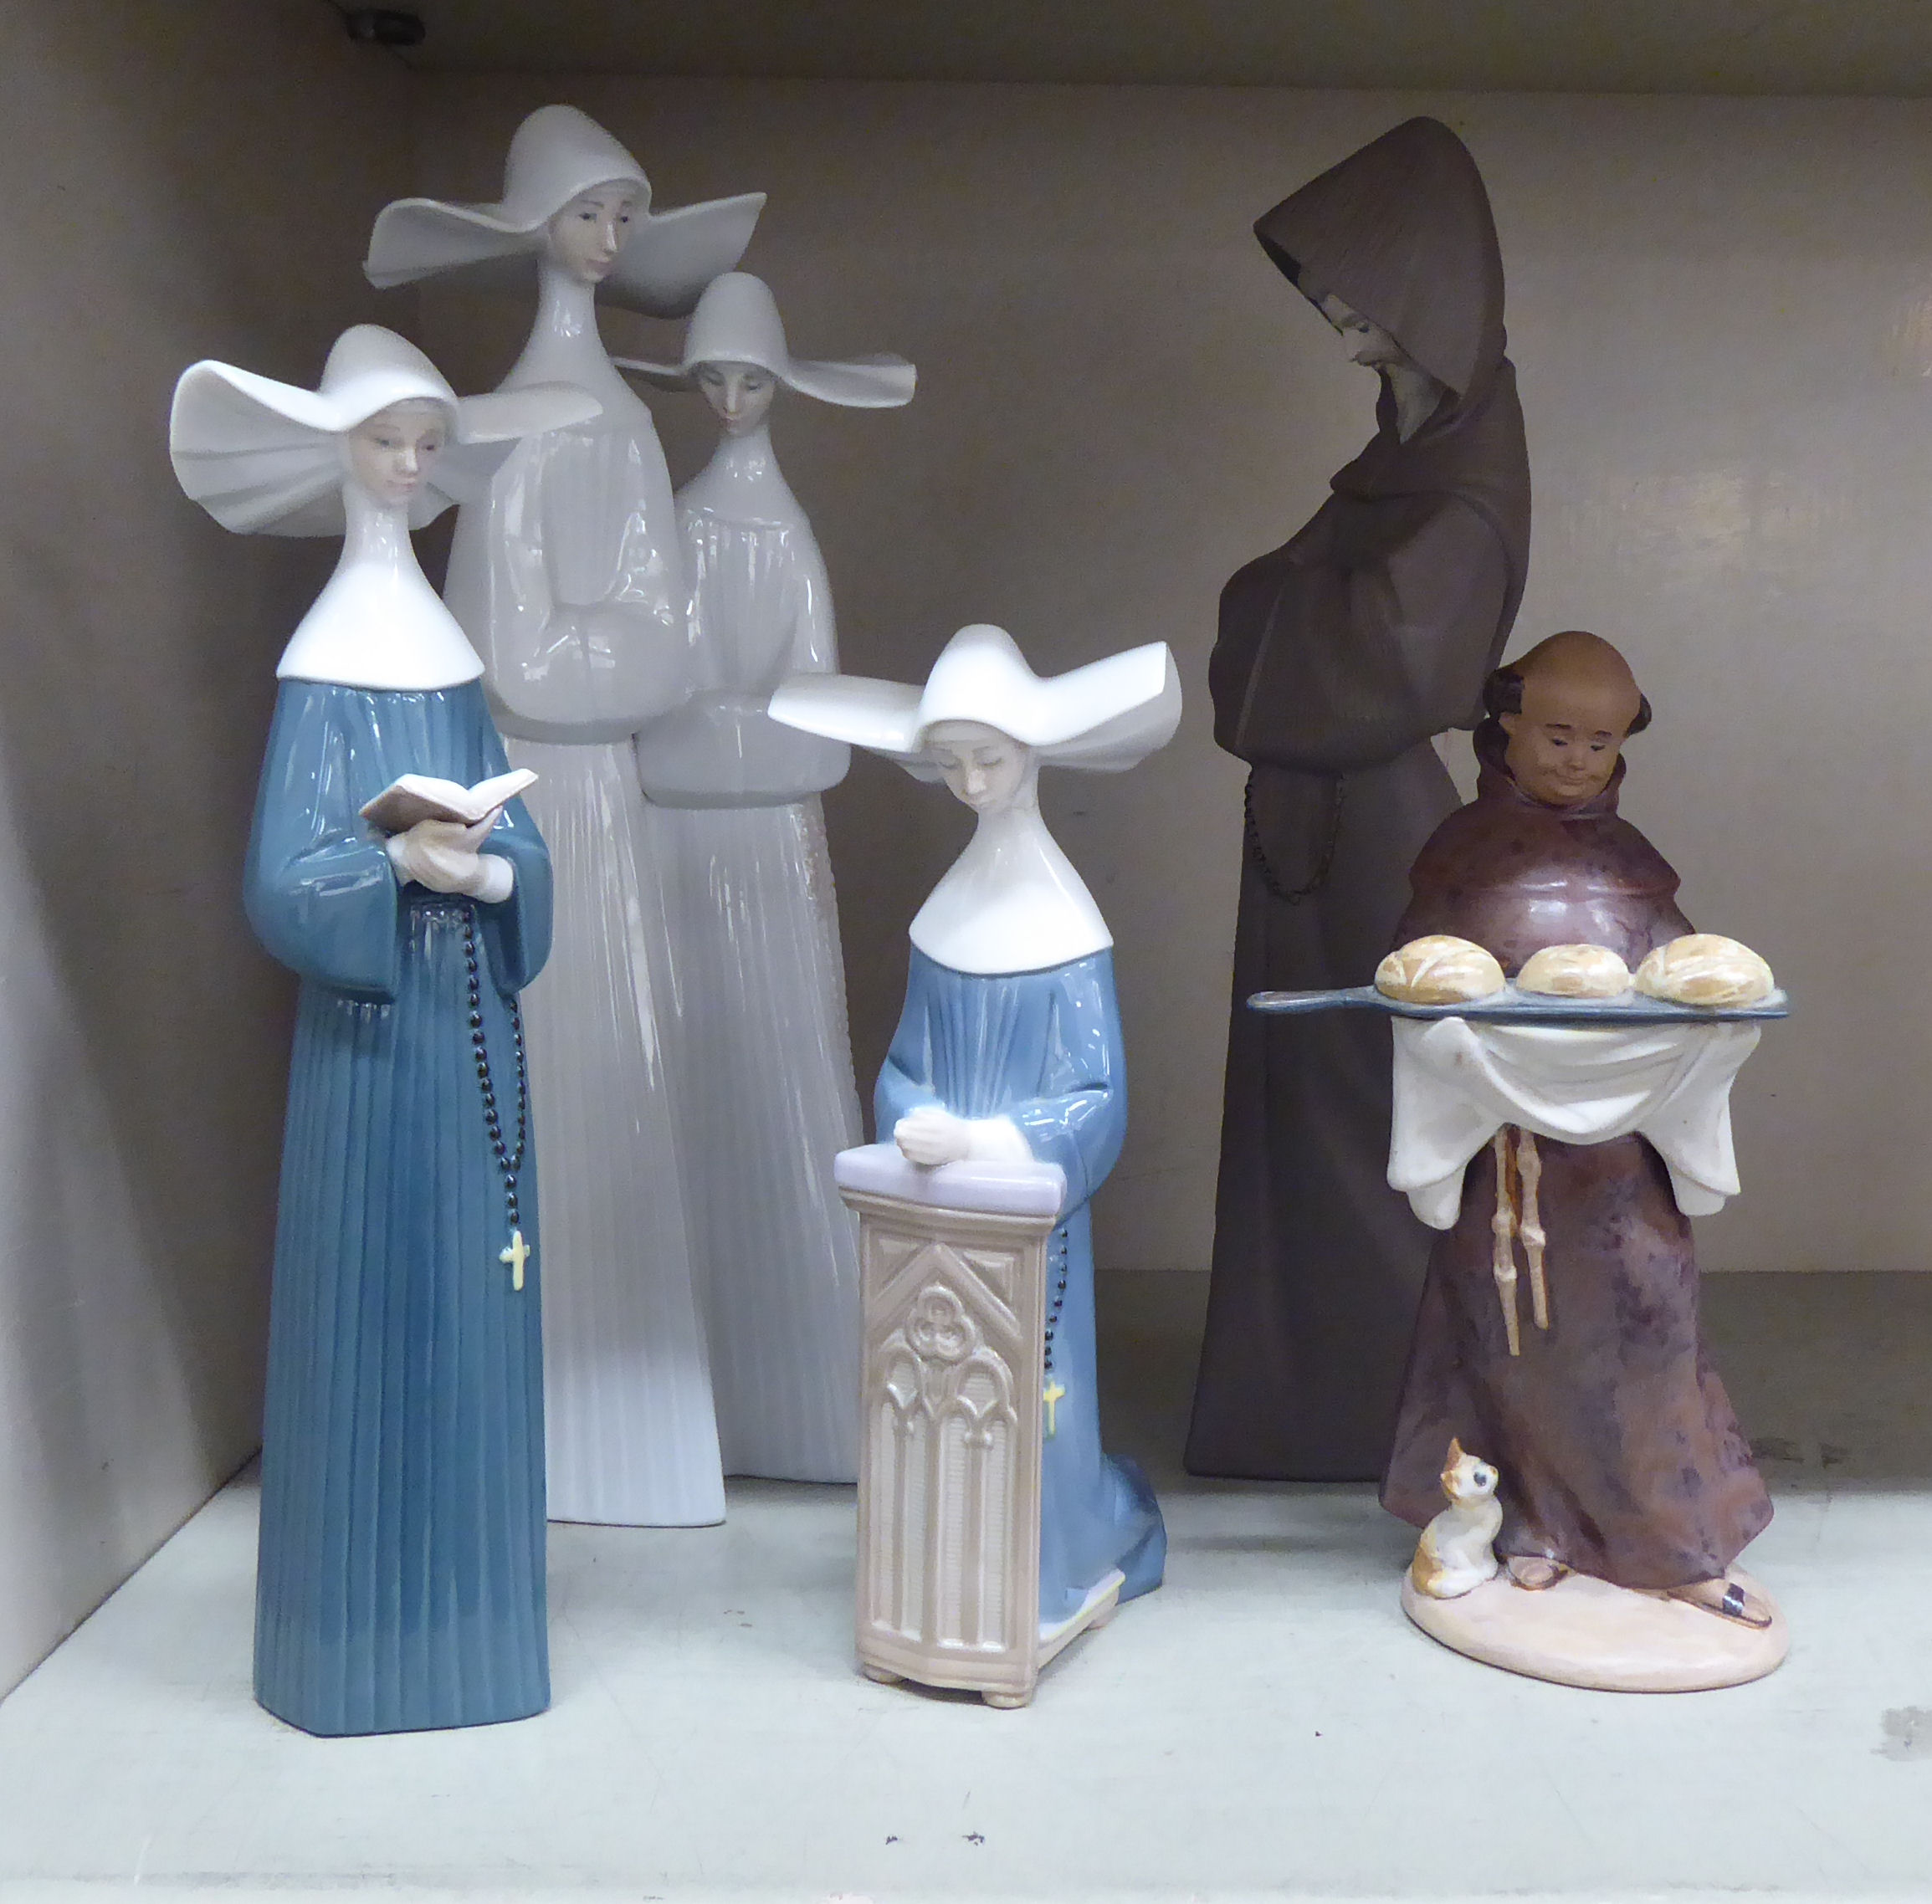 Lladro porcelain figures, depicting nuns and a monk  largest 13.5"h